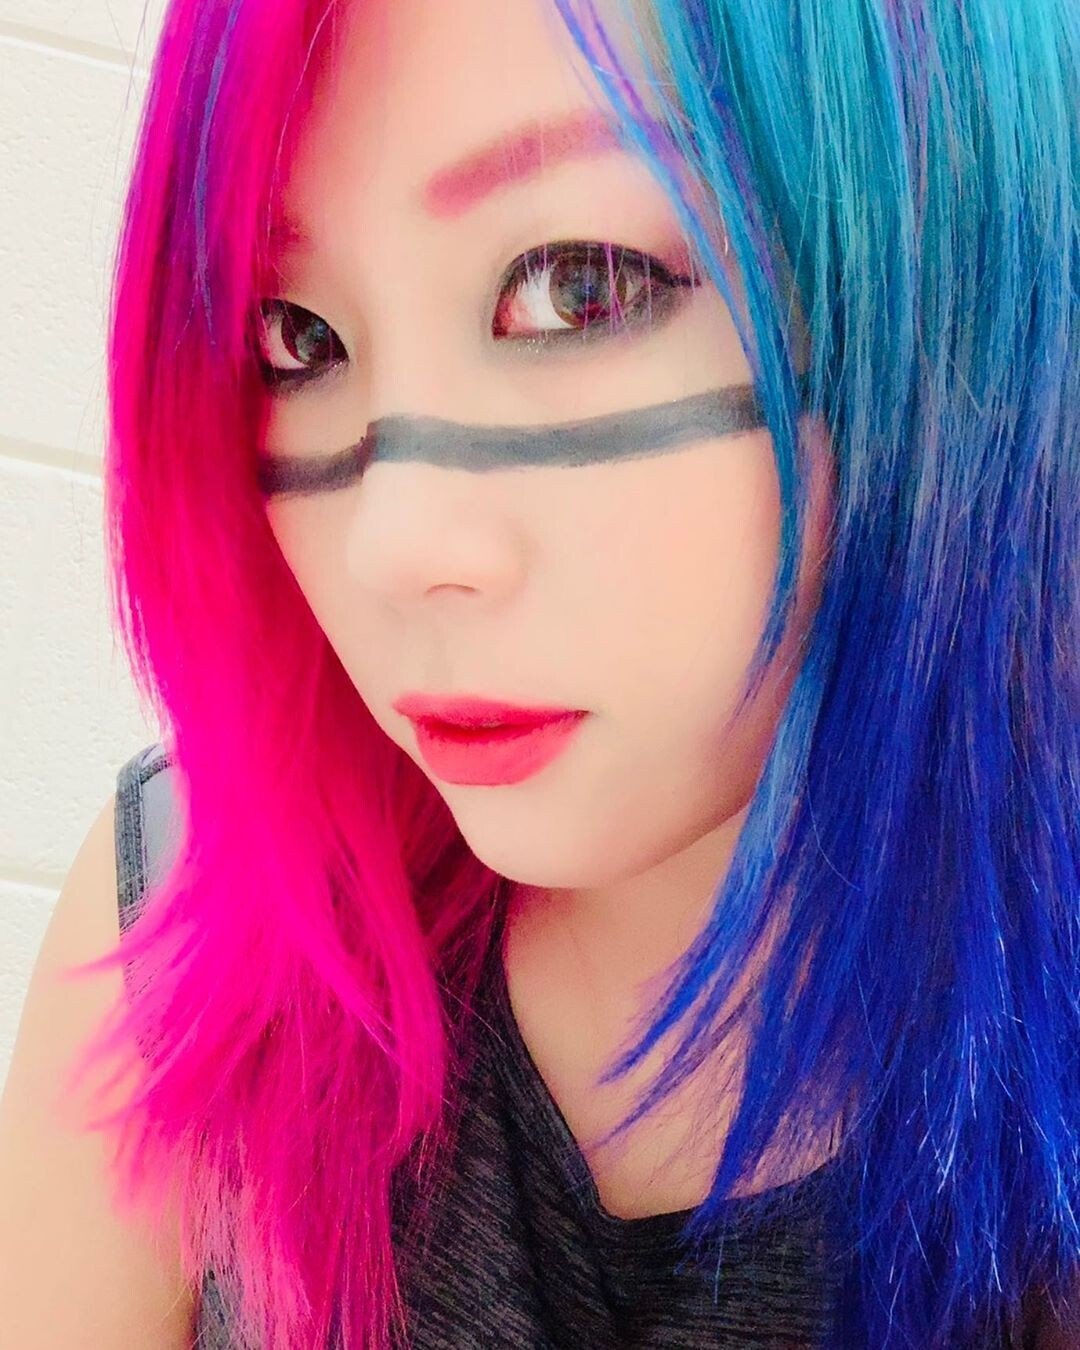 And in the pink and blue corner is WWE champ Asuka. Photo: @wwe_asuka/Instagram